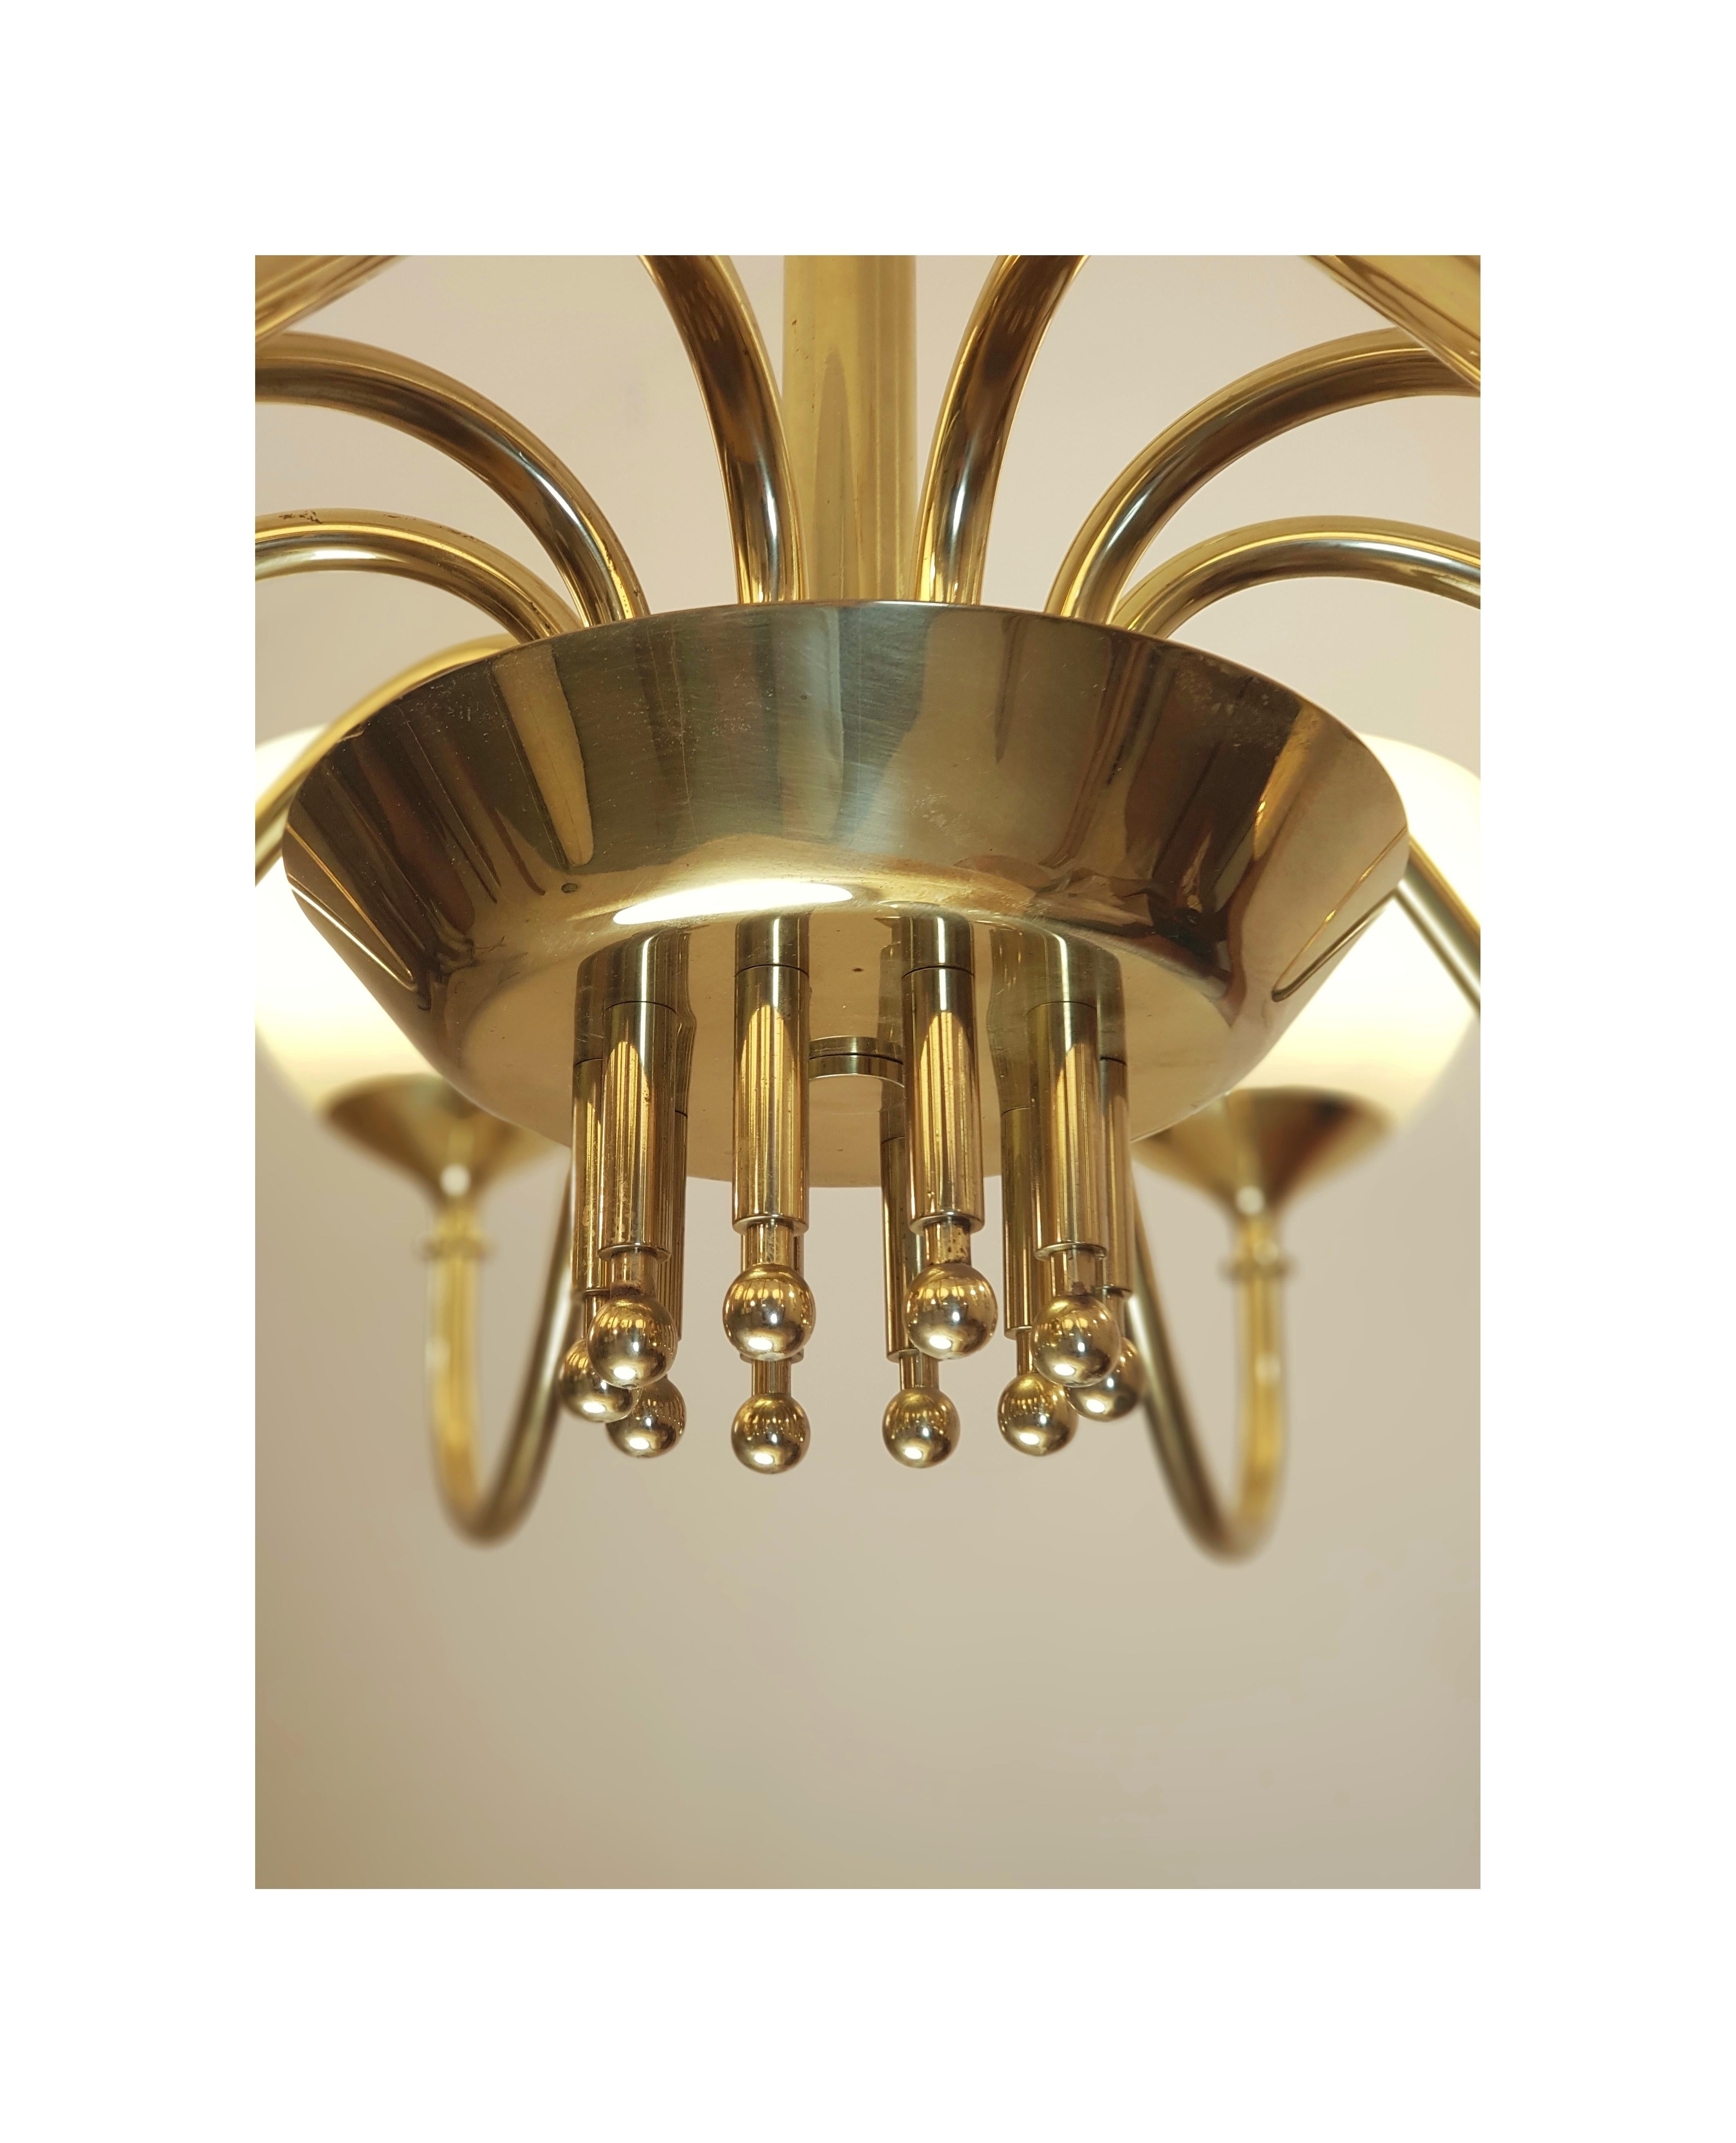 Brass Monumental Paavo Tynell chandelier, Oy Taito Ab 1952